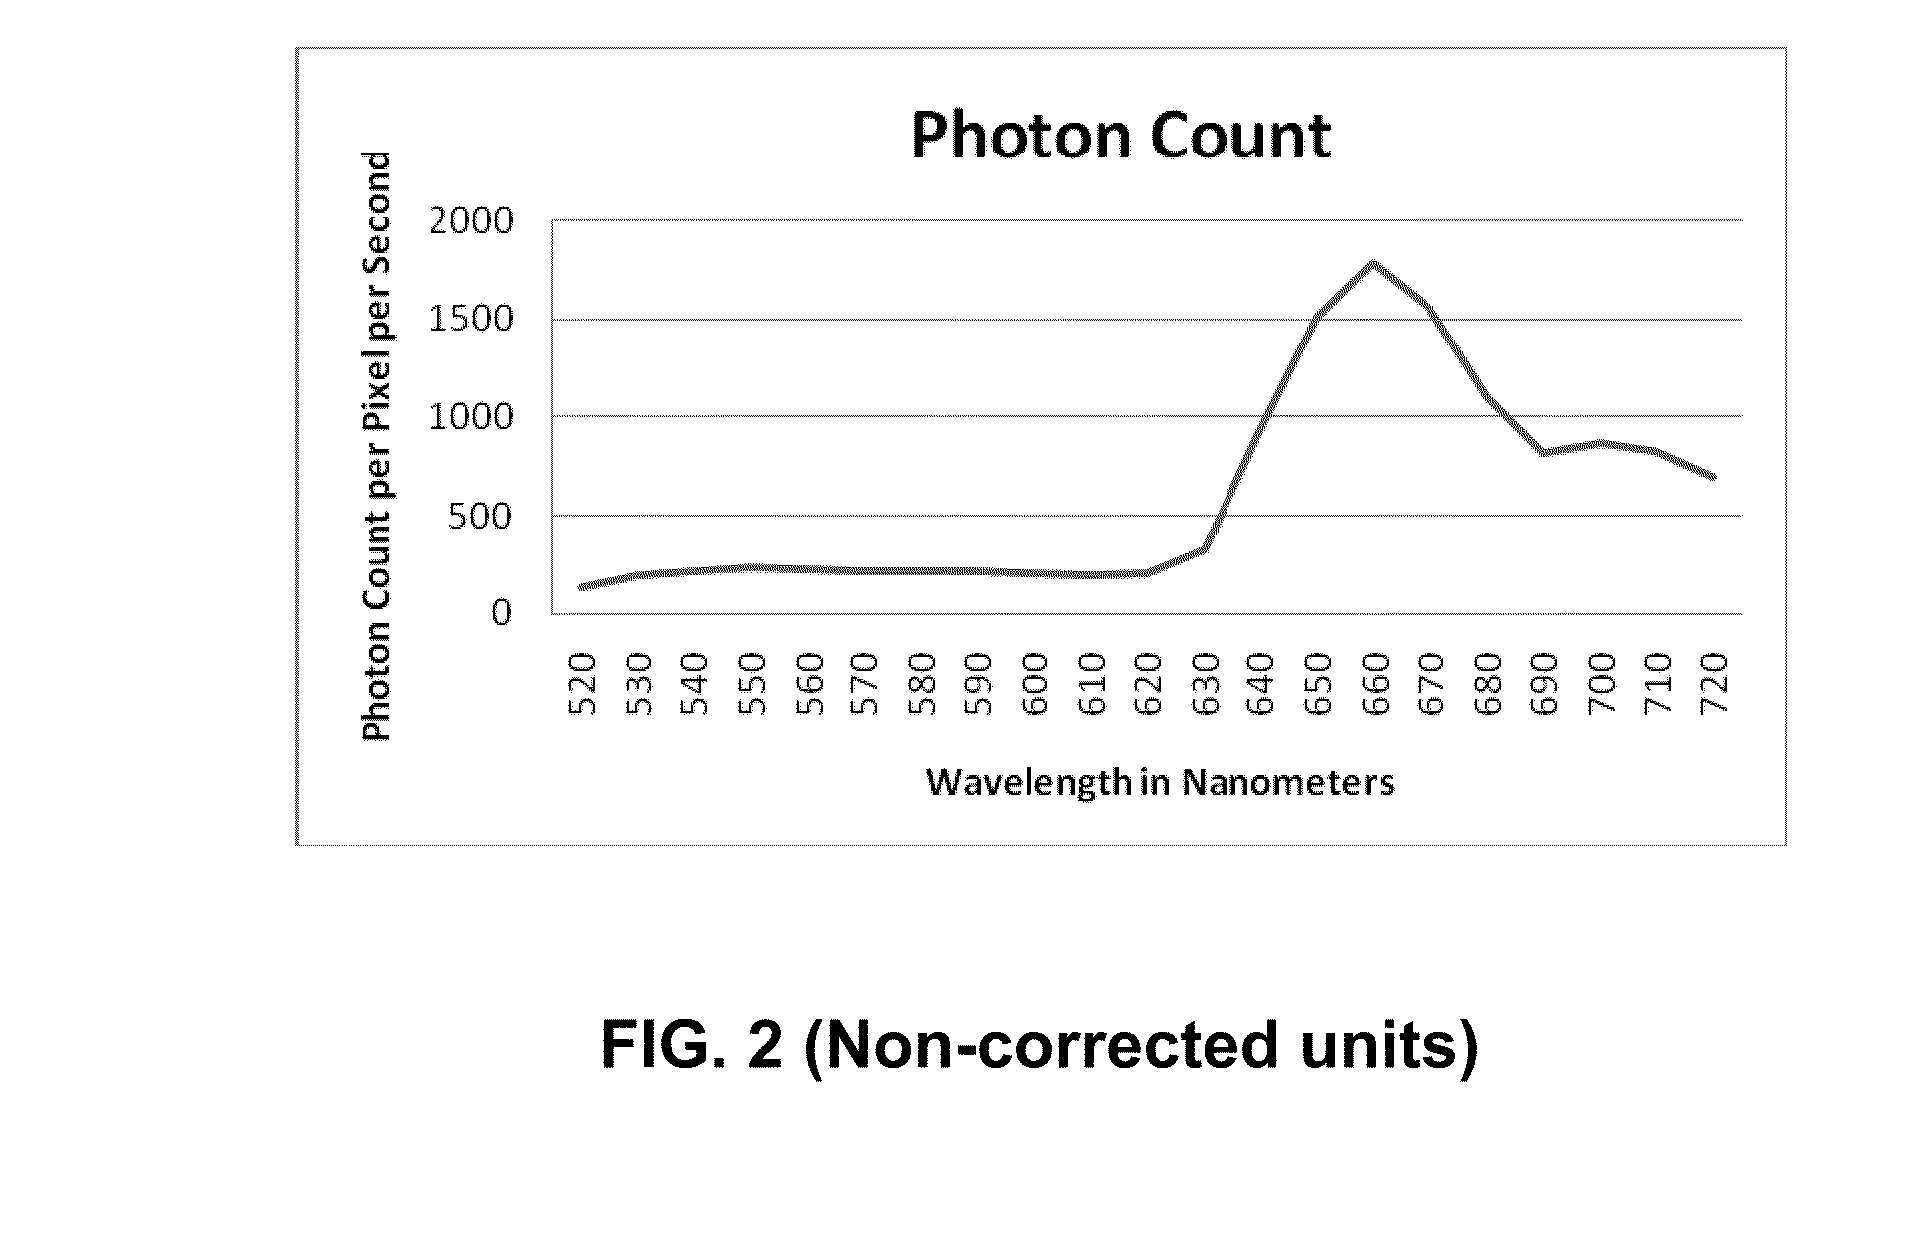 System and Method for Analyzing Samples Labeled with 5, 10, 15, 20 Tetrakis (4-Carboxyphenyl) Porphine (TCPP)